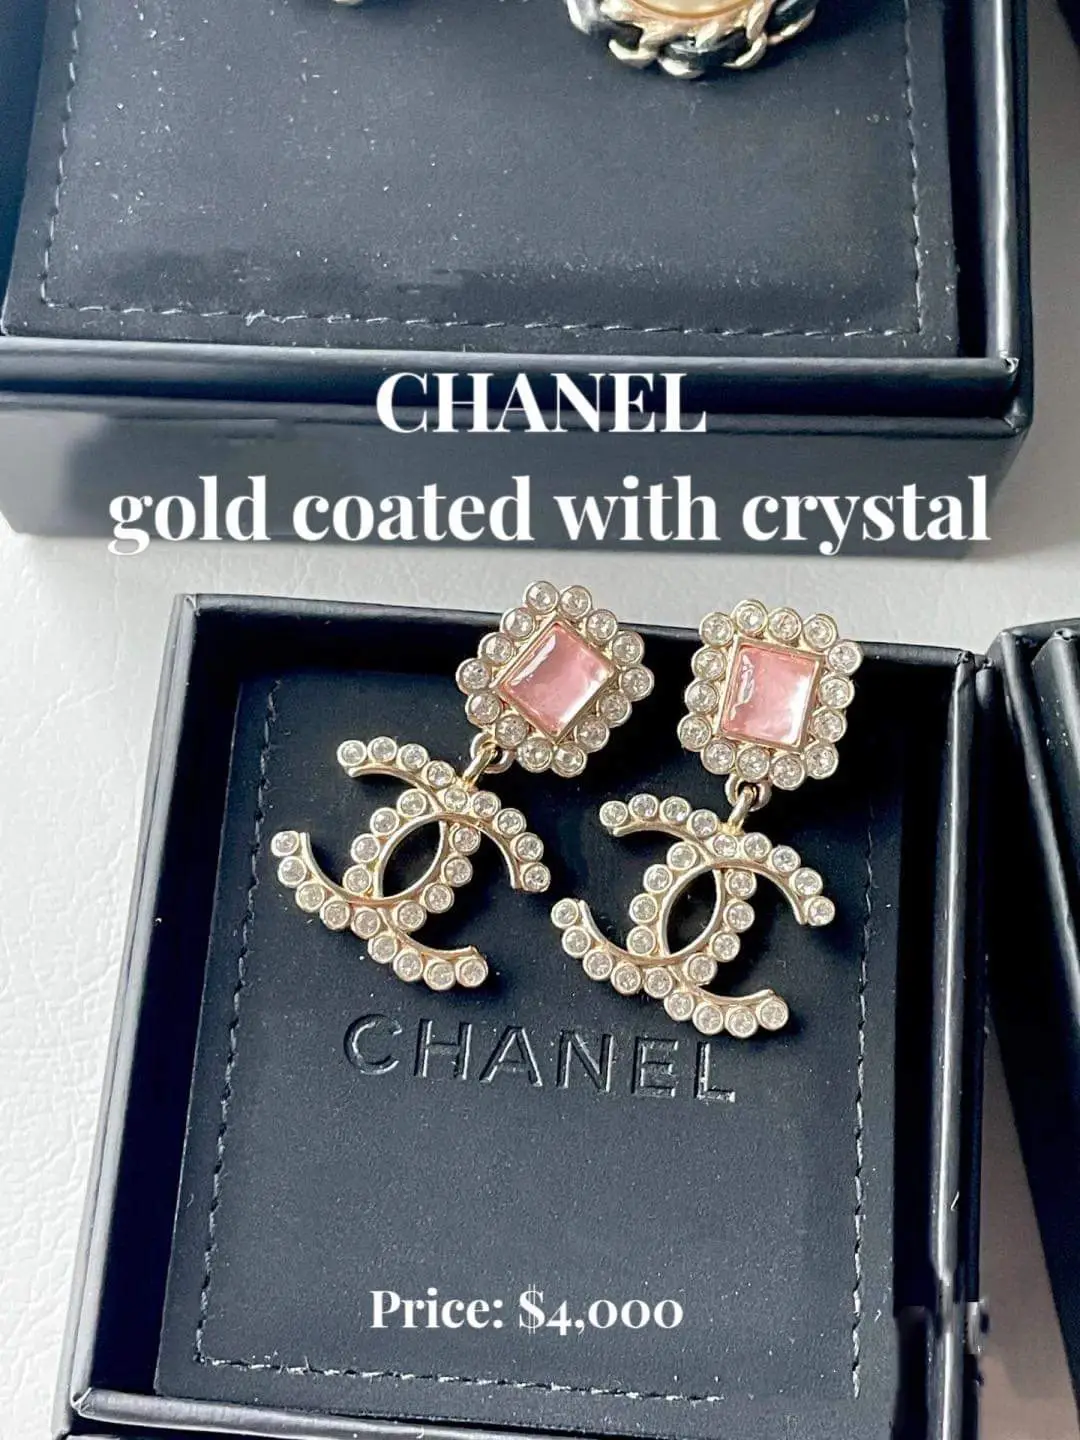 My Chanel earrings collection, Gallery posted by Aly 🦋